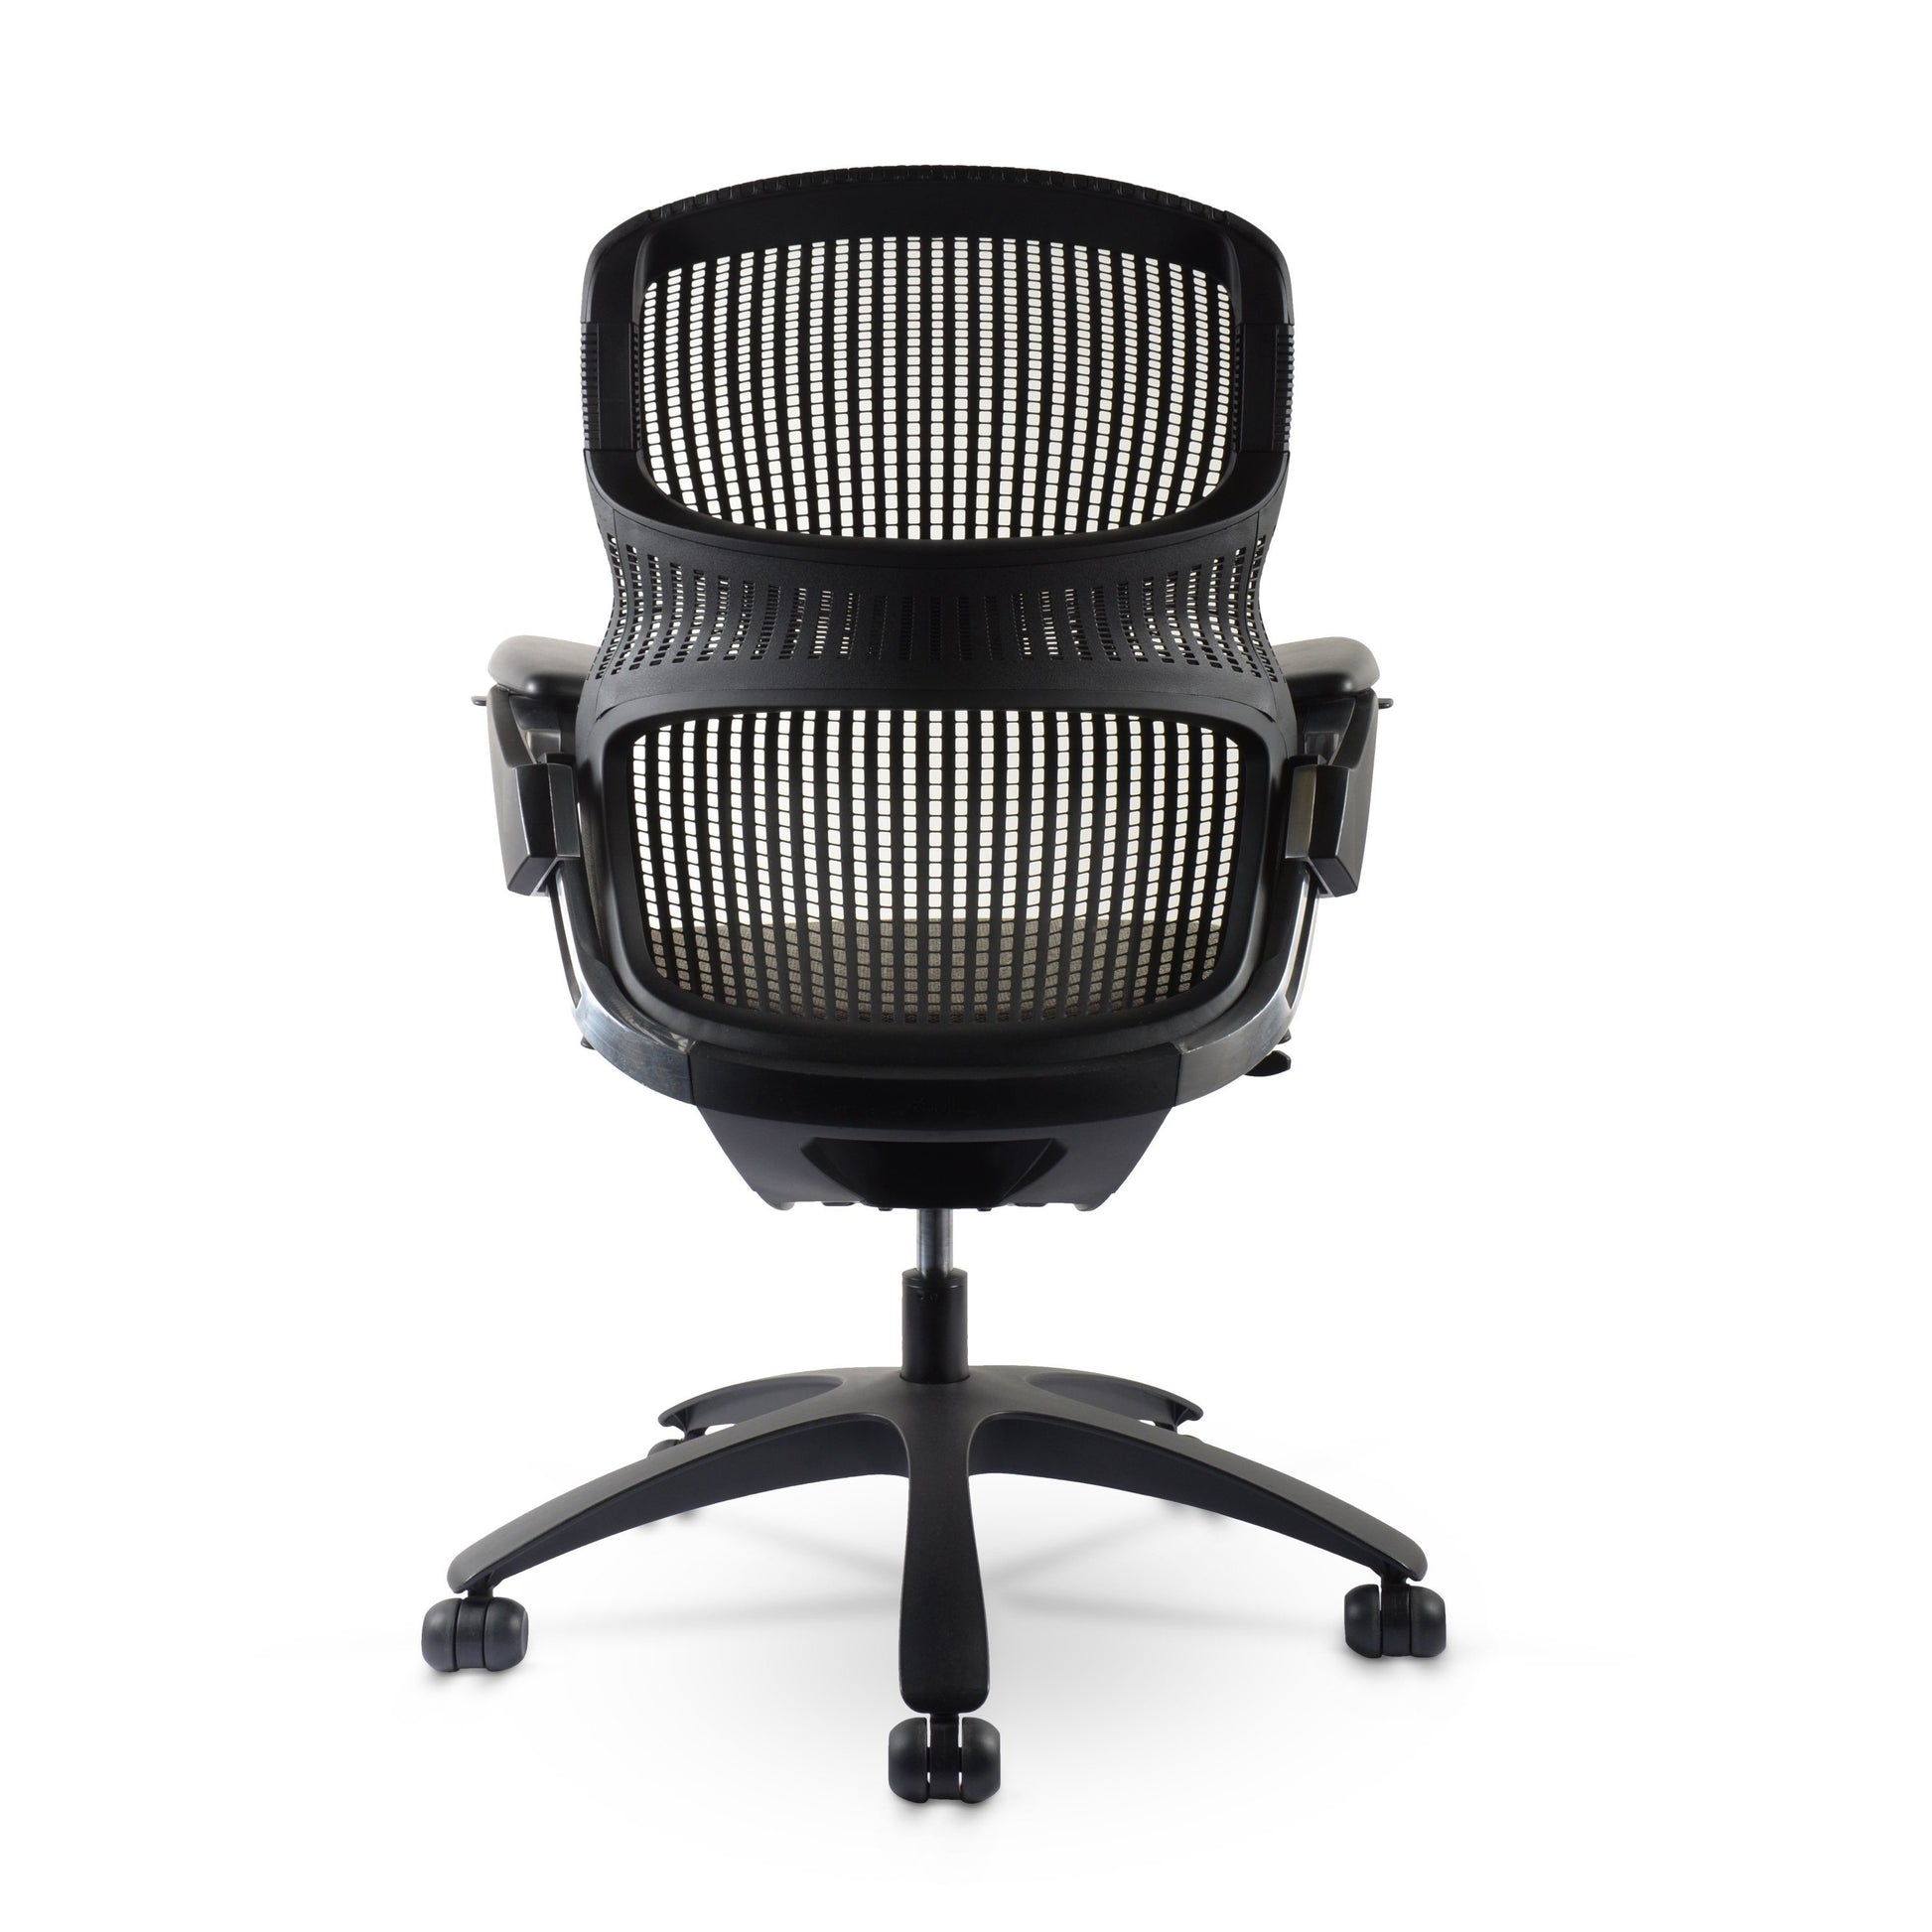 Knoll Generation Chair Review